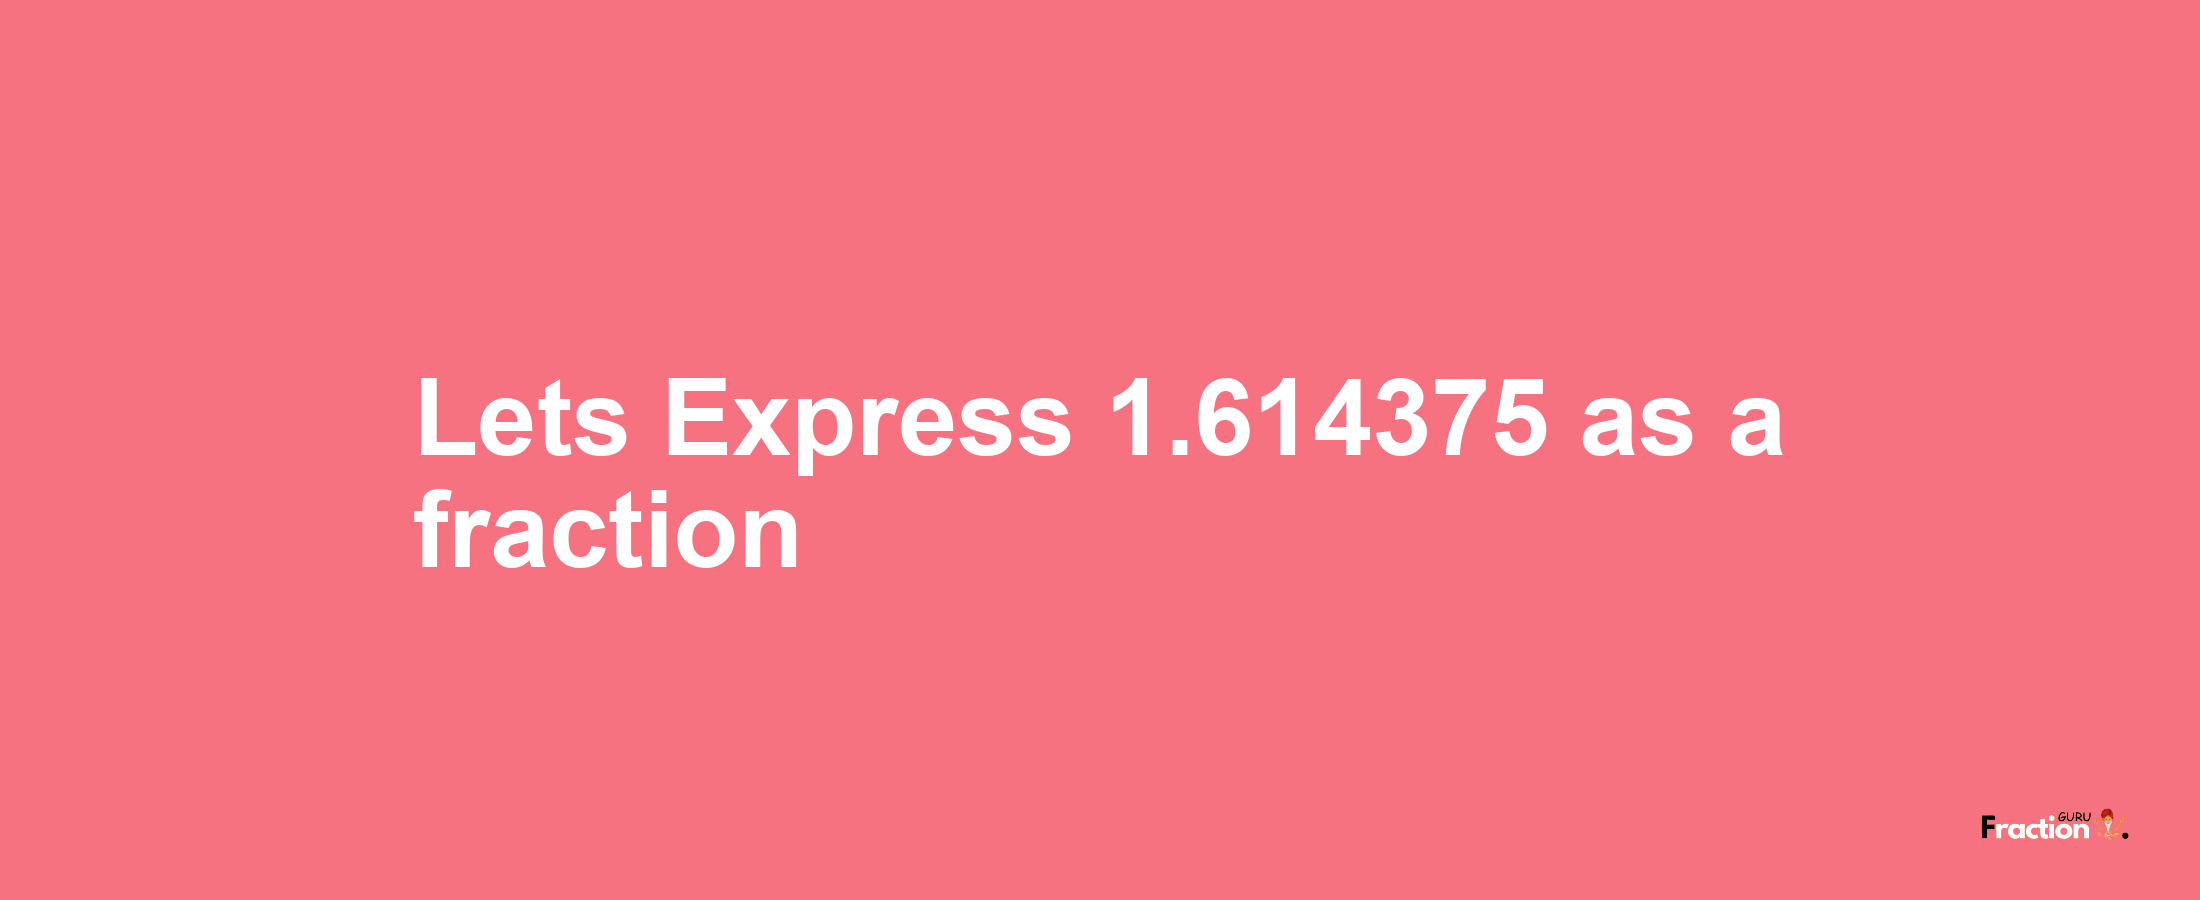 Lets Express 1.614375 as afraction